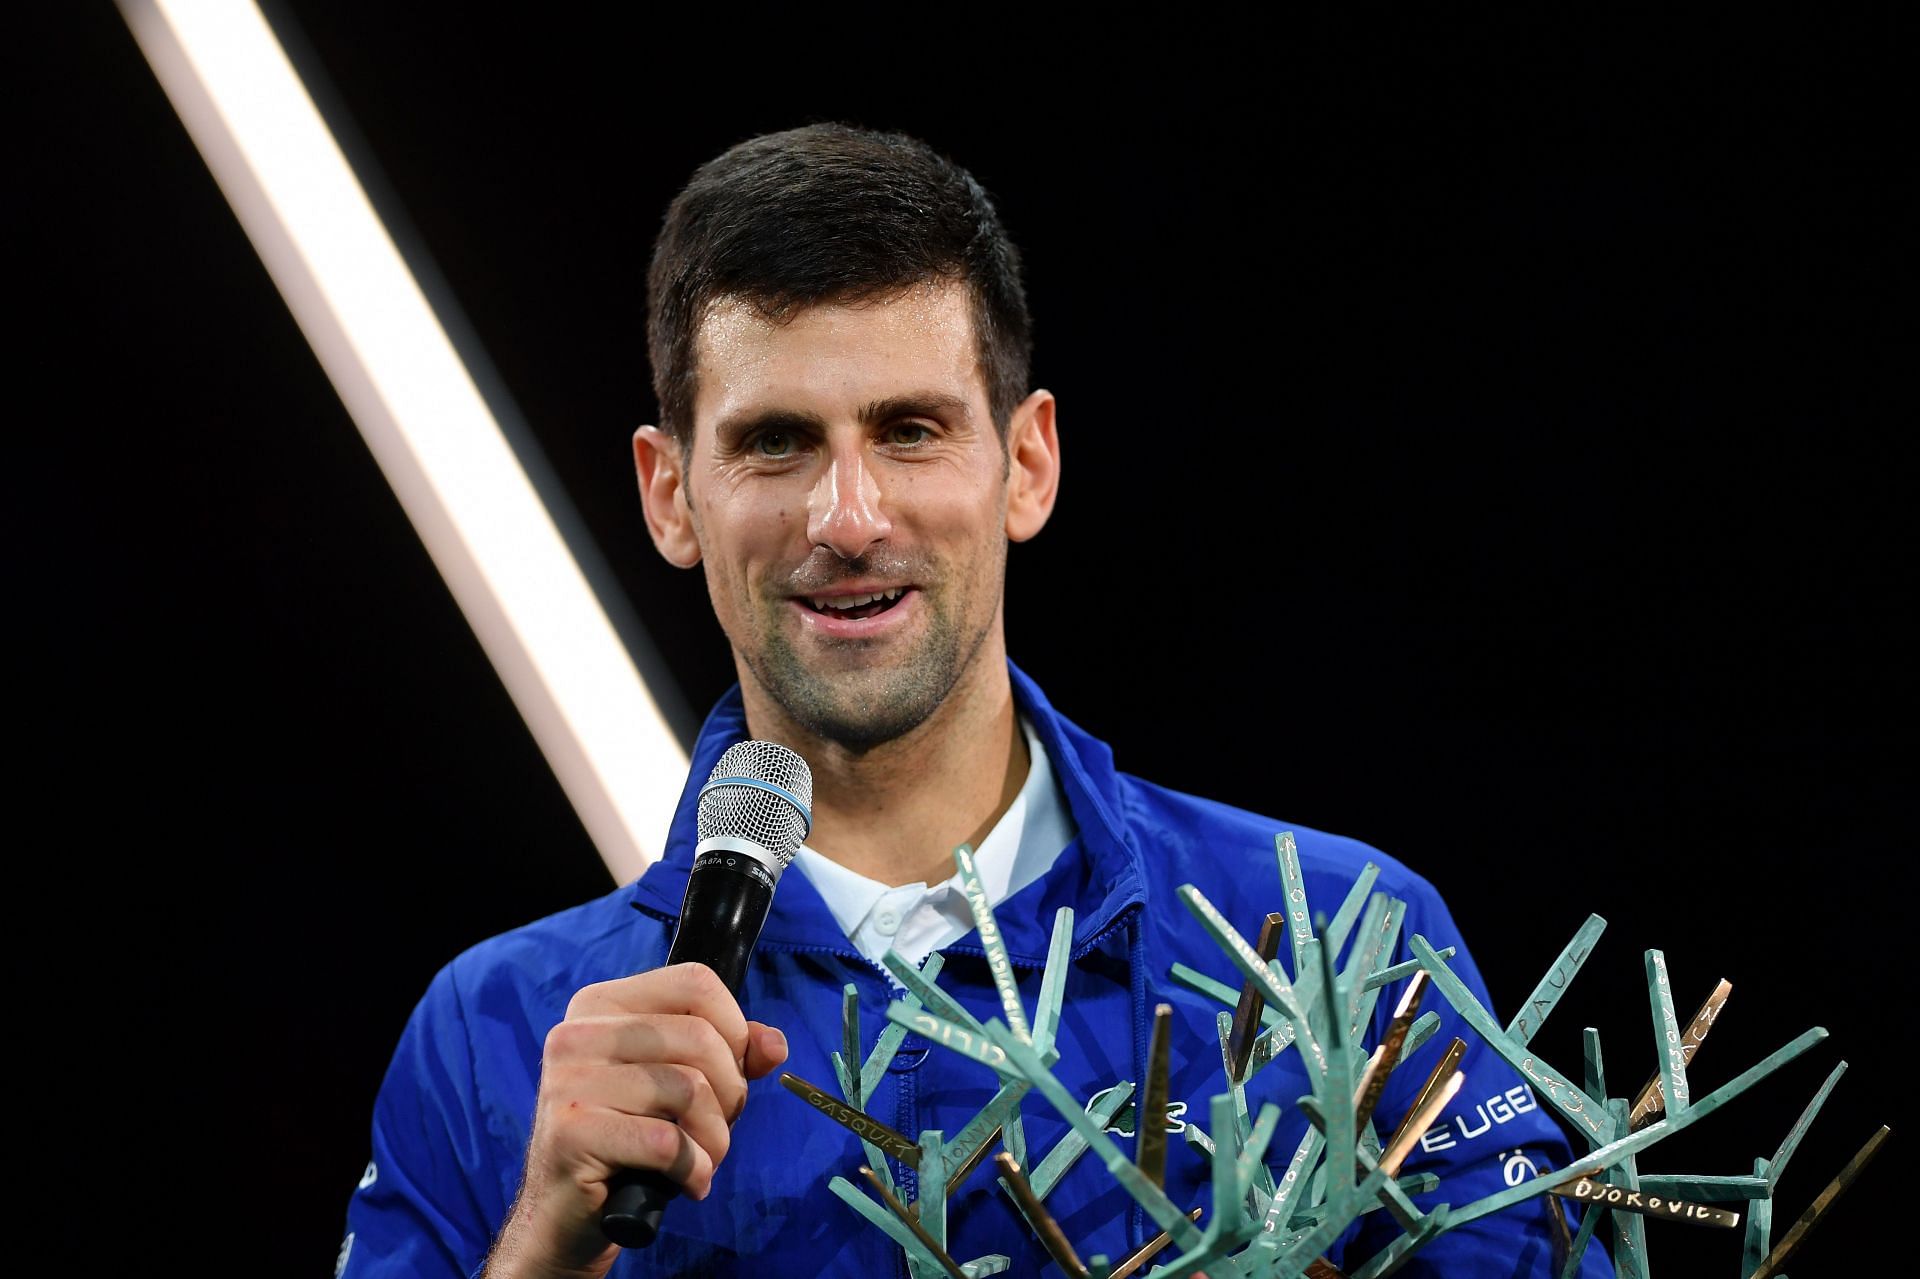 Novak Djokovic is the reigning champion at the Paris Masters